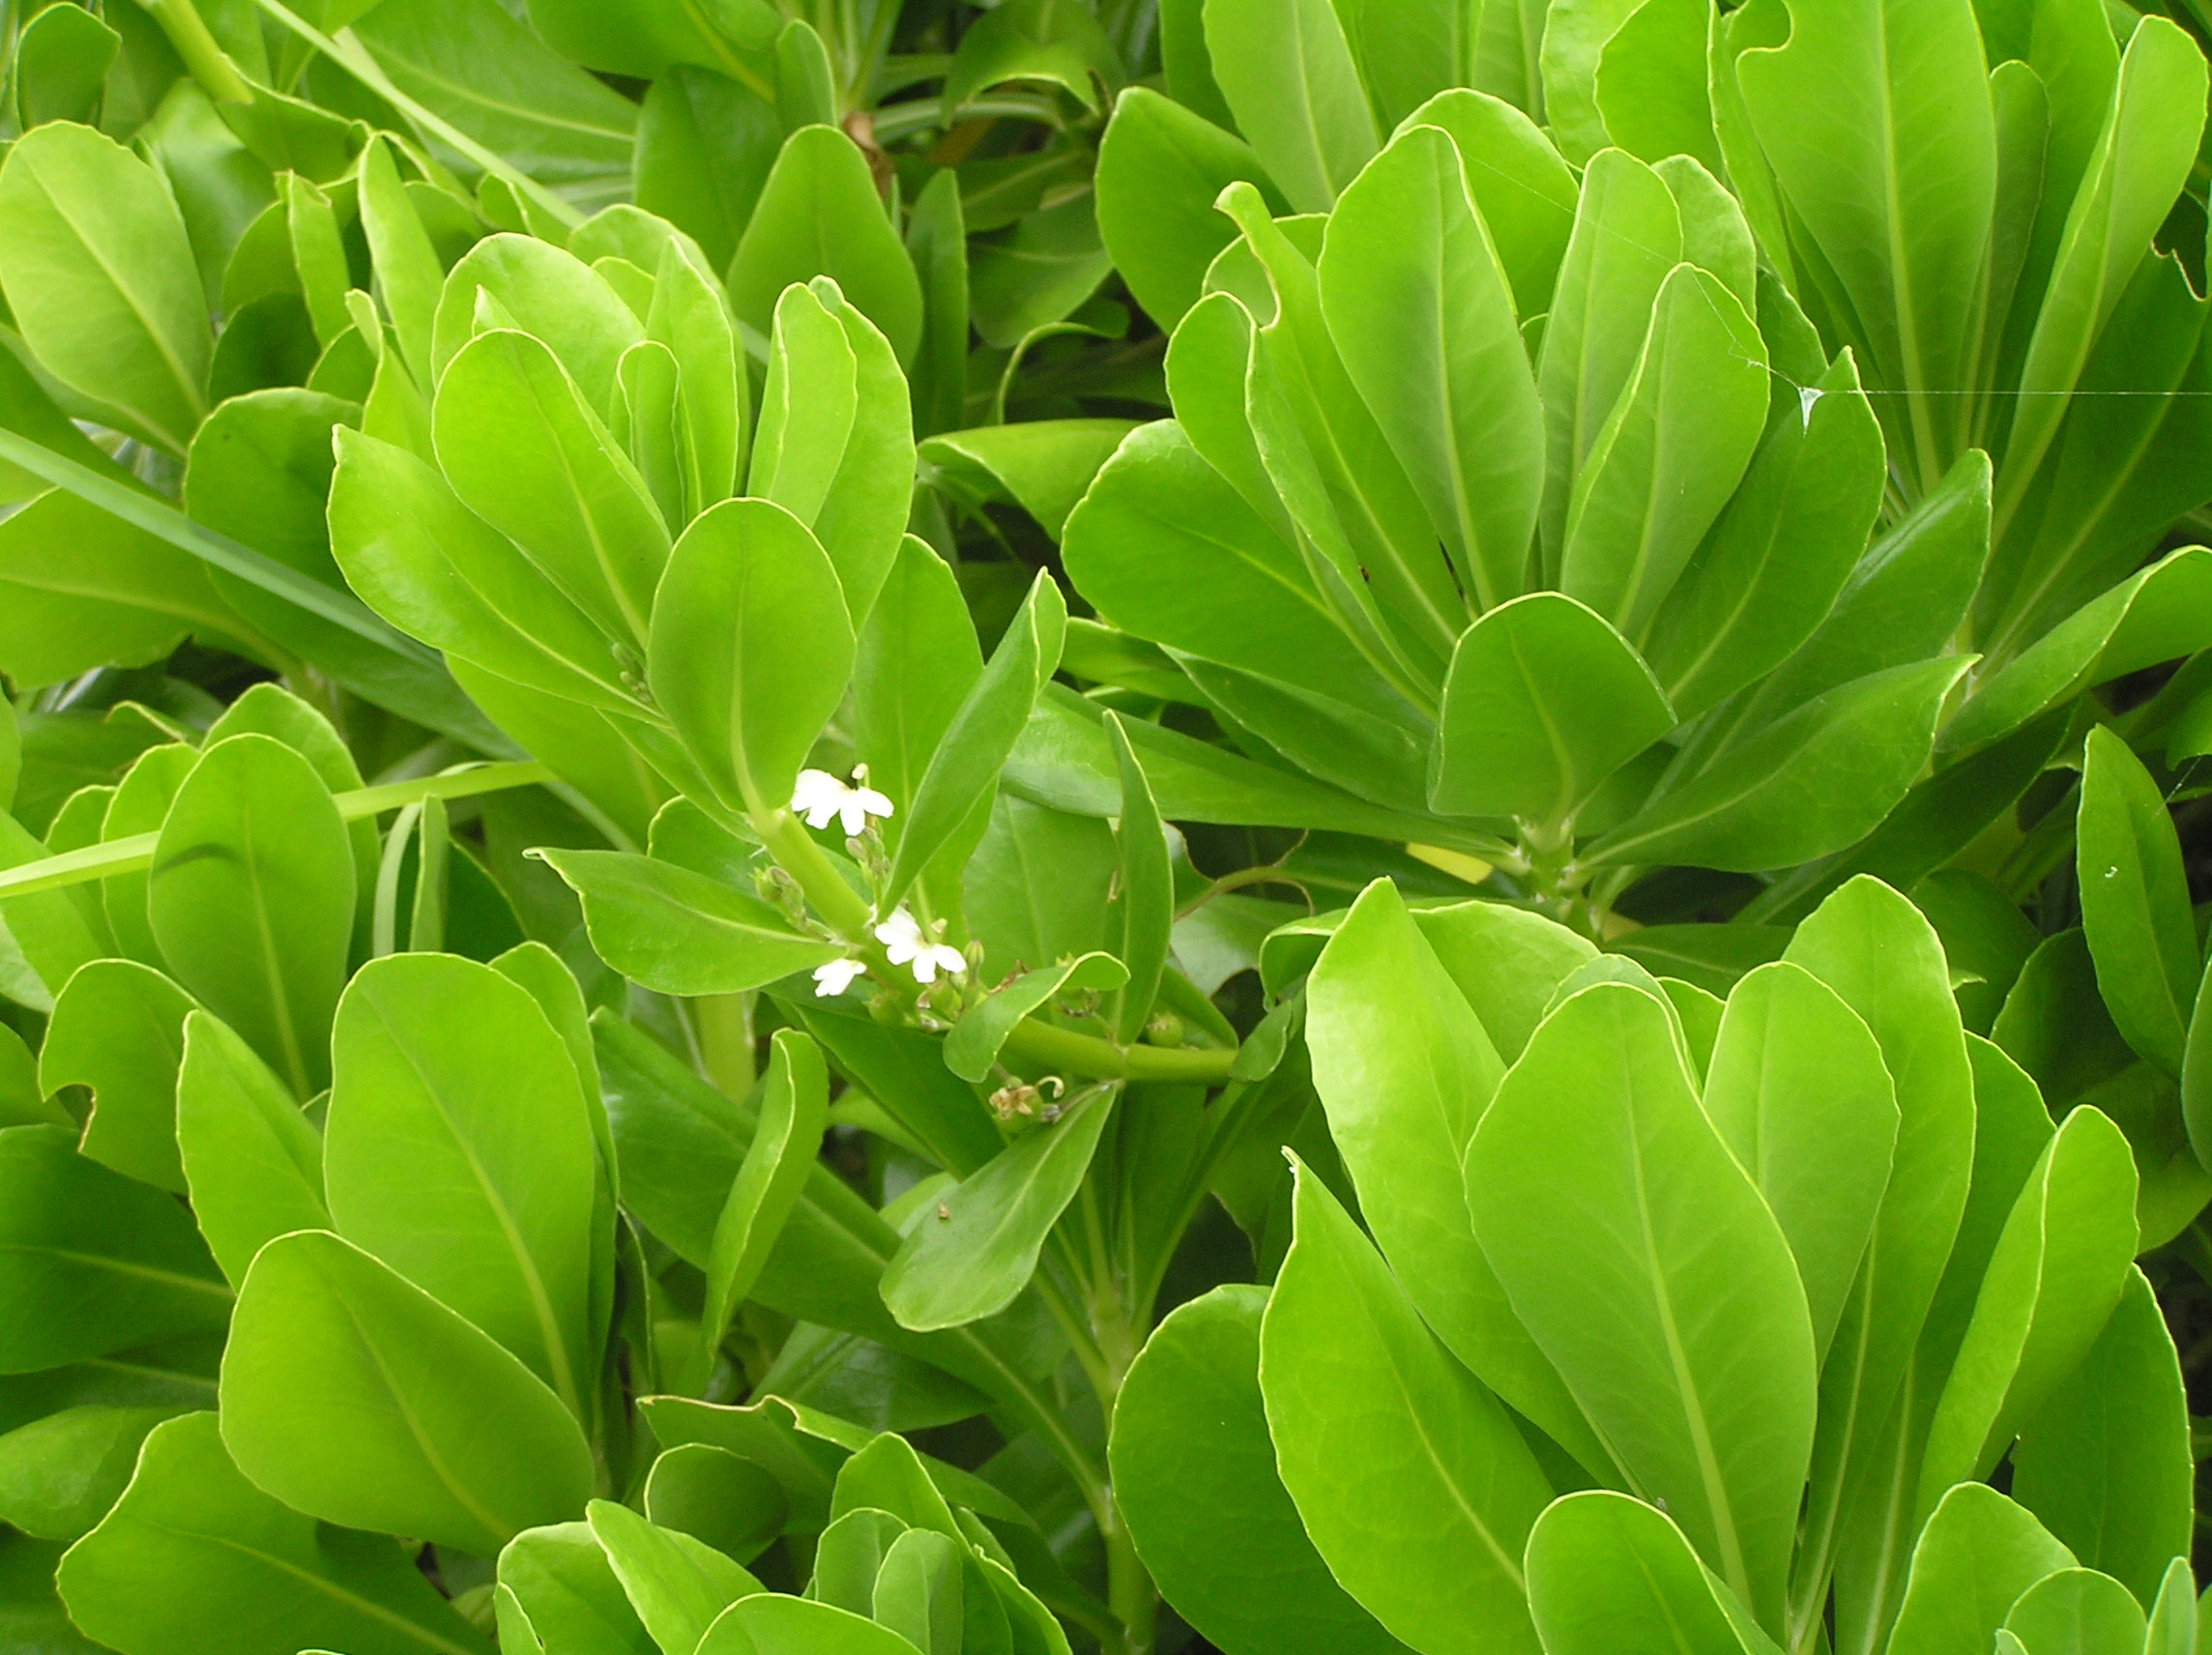 Bright green oval leaves and small white flowers